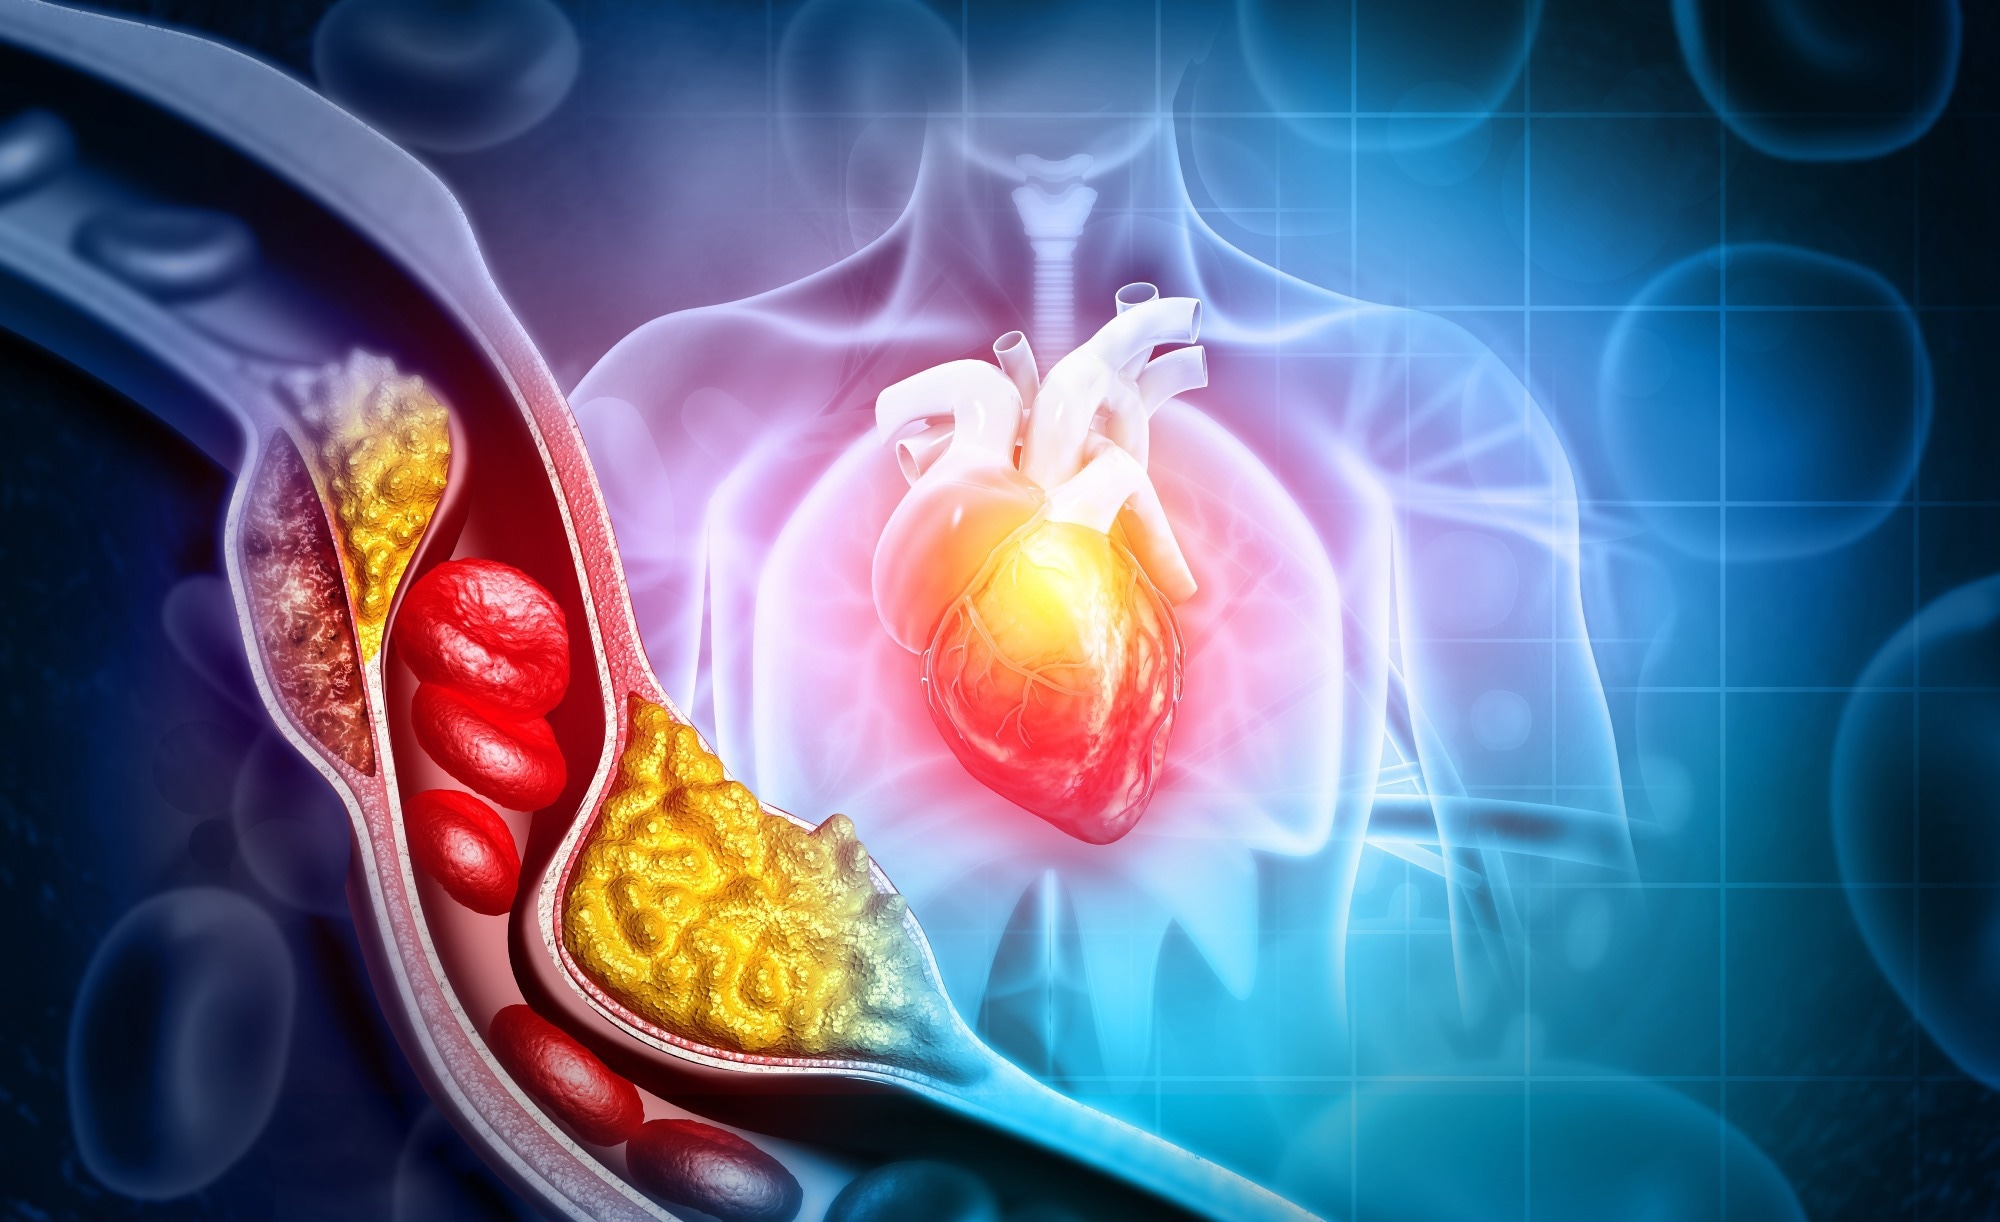 Study reveals type 2 diabetes diagnosis spurs cholesterol shifts, alters Ccardiovascular risk